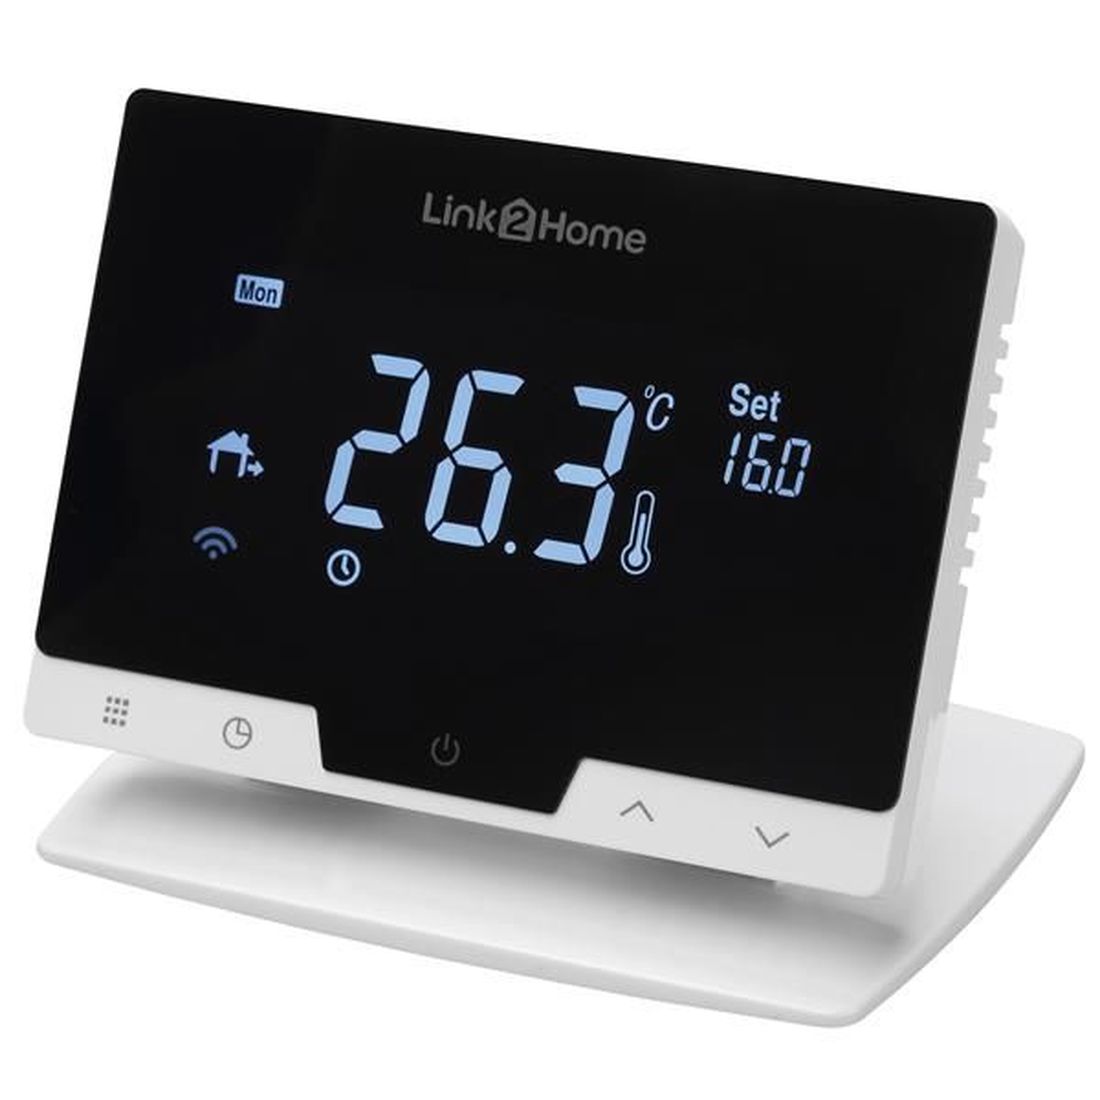 Link2Home Smart Thermostat                  